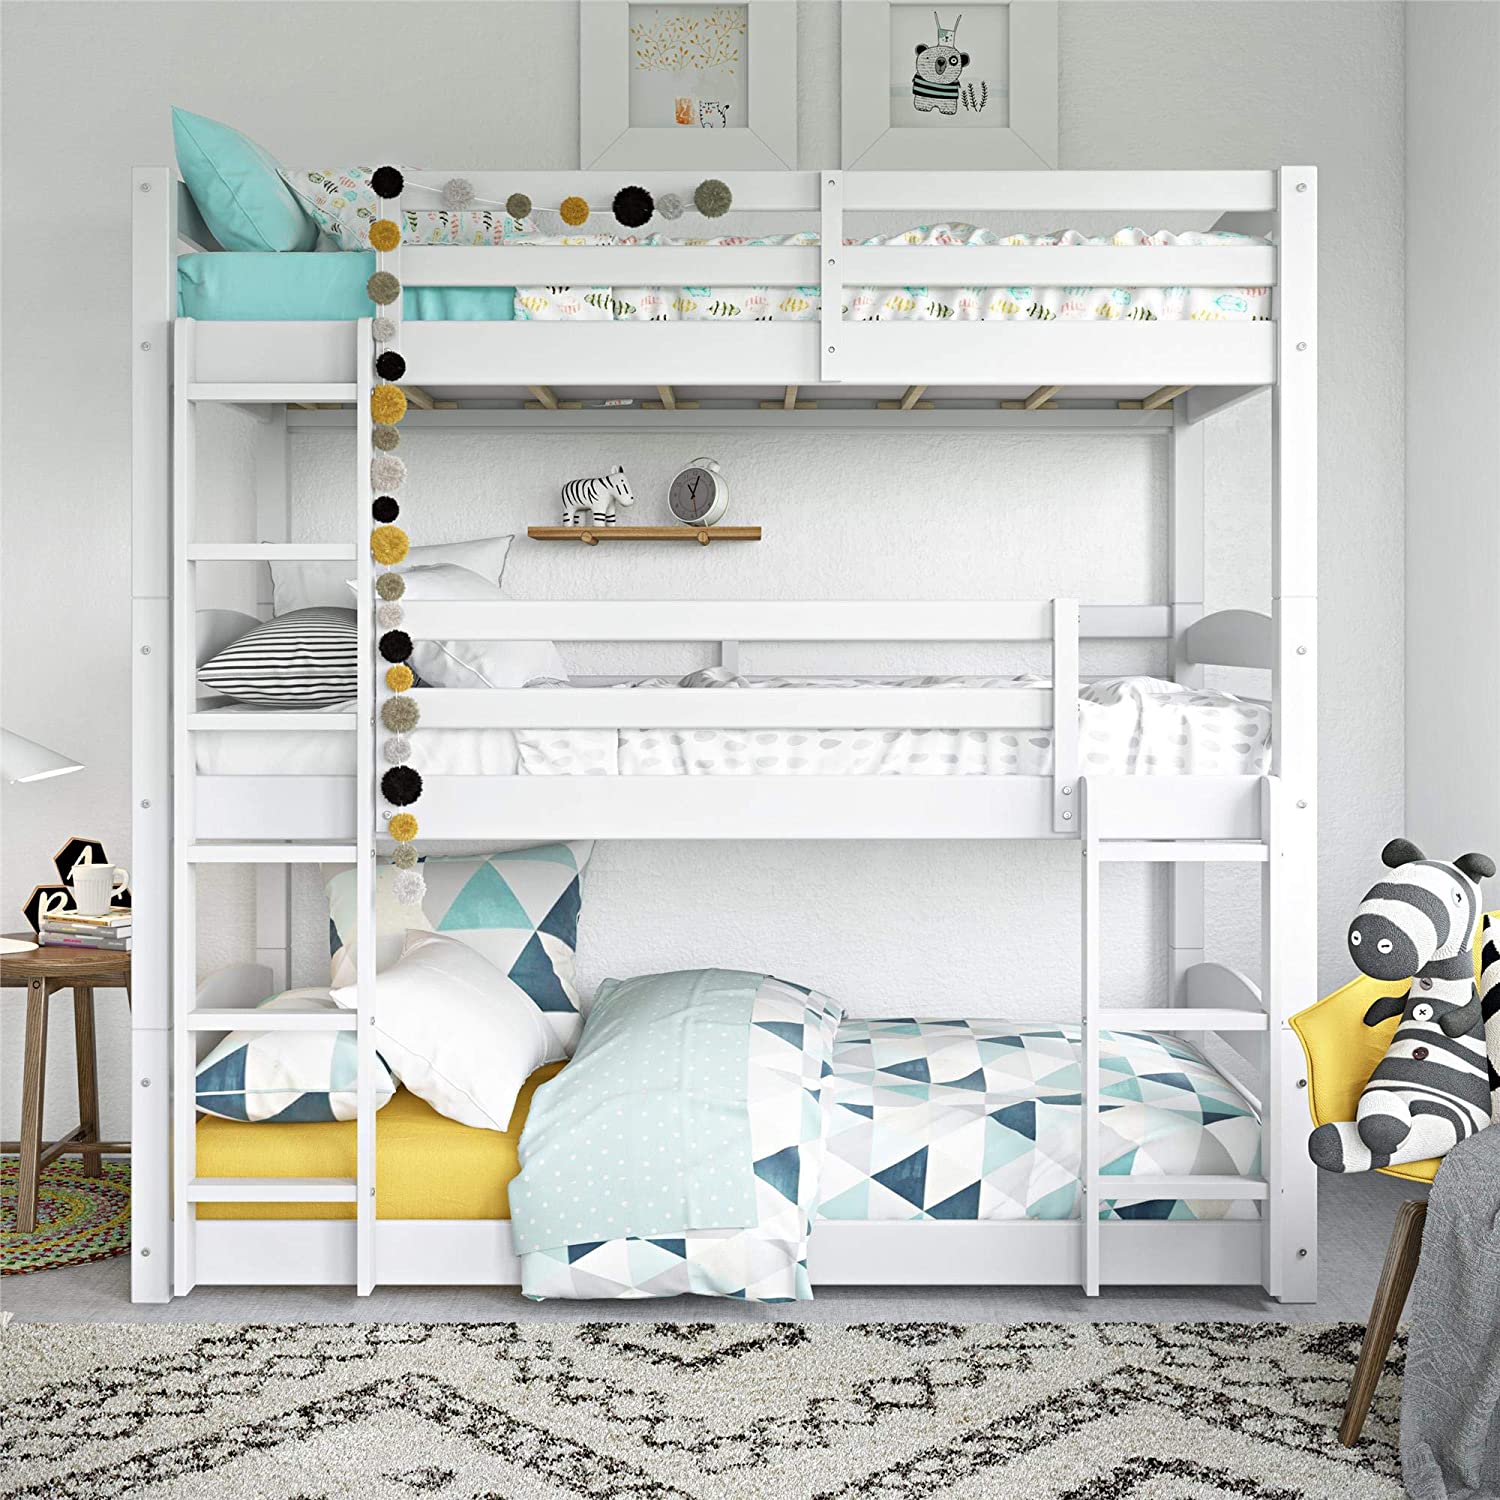 26 Bunk Beds You Ll Want For Yourself, Fun Bunk Beds For Toddlers